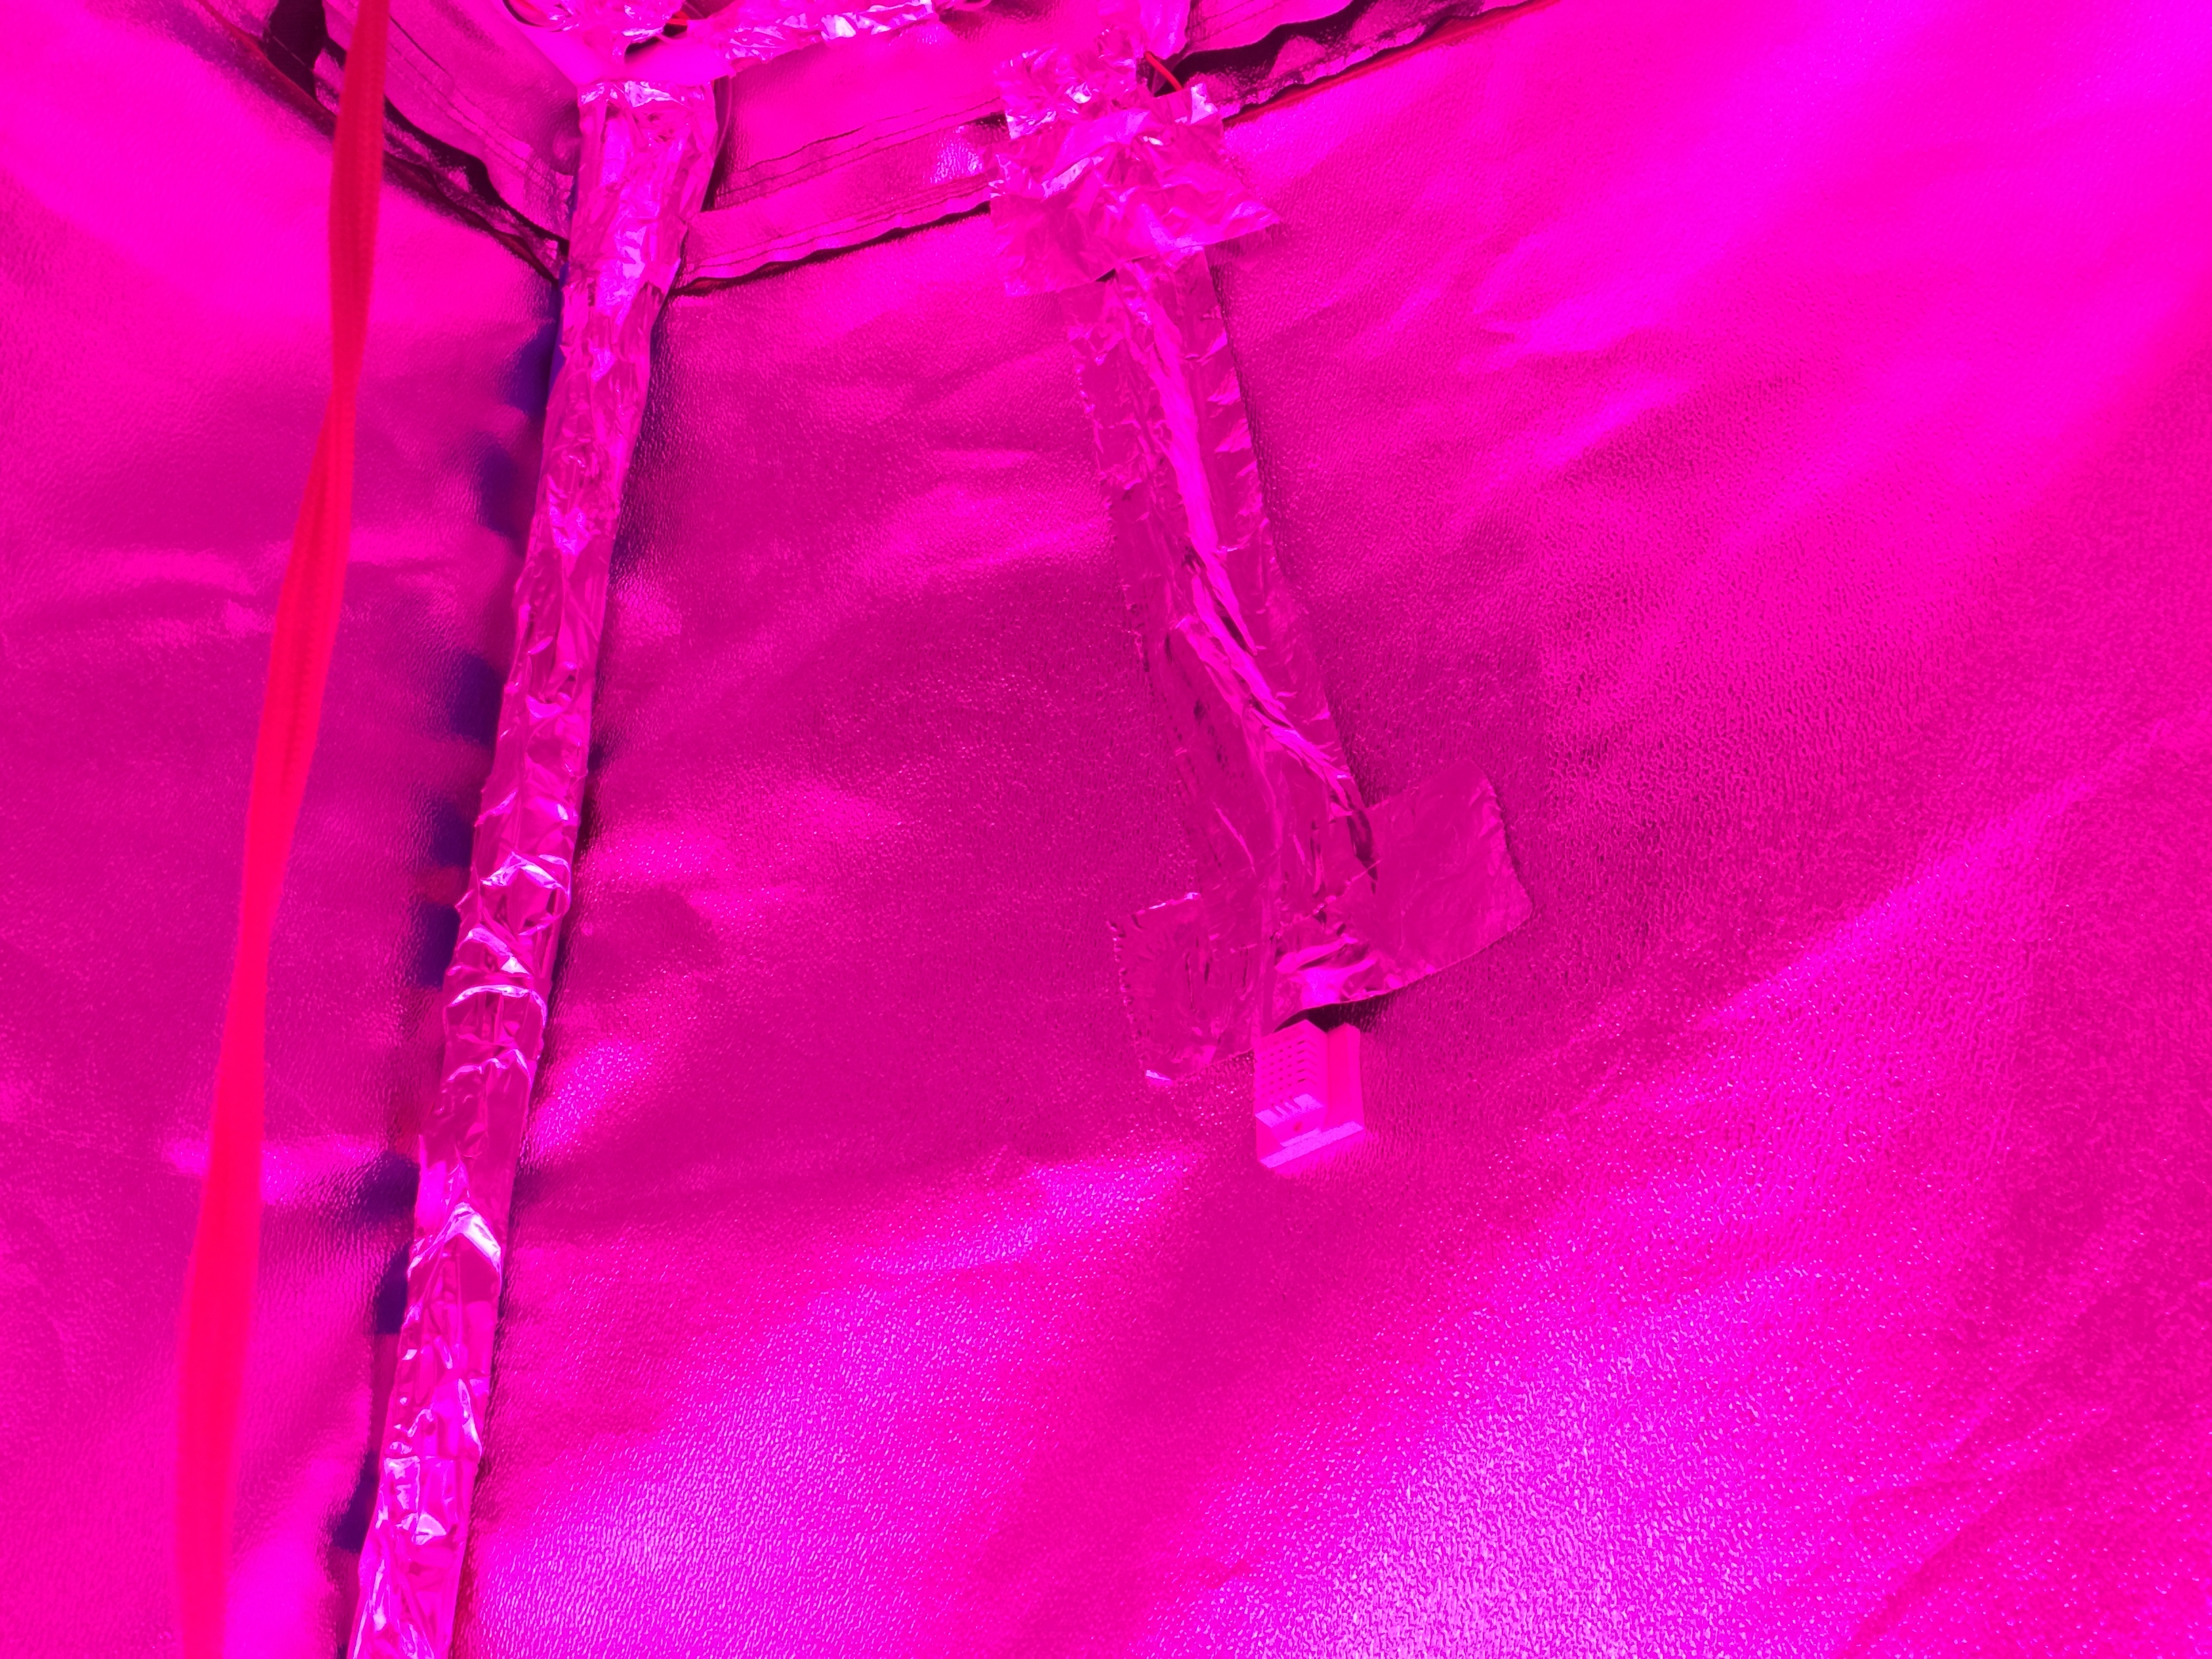 More wire management on right side of tent